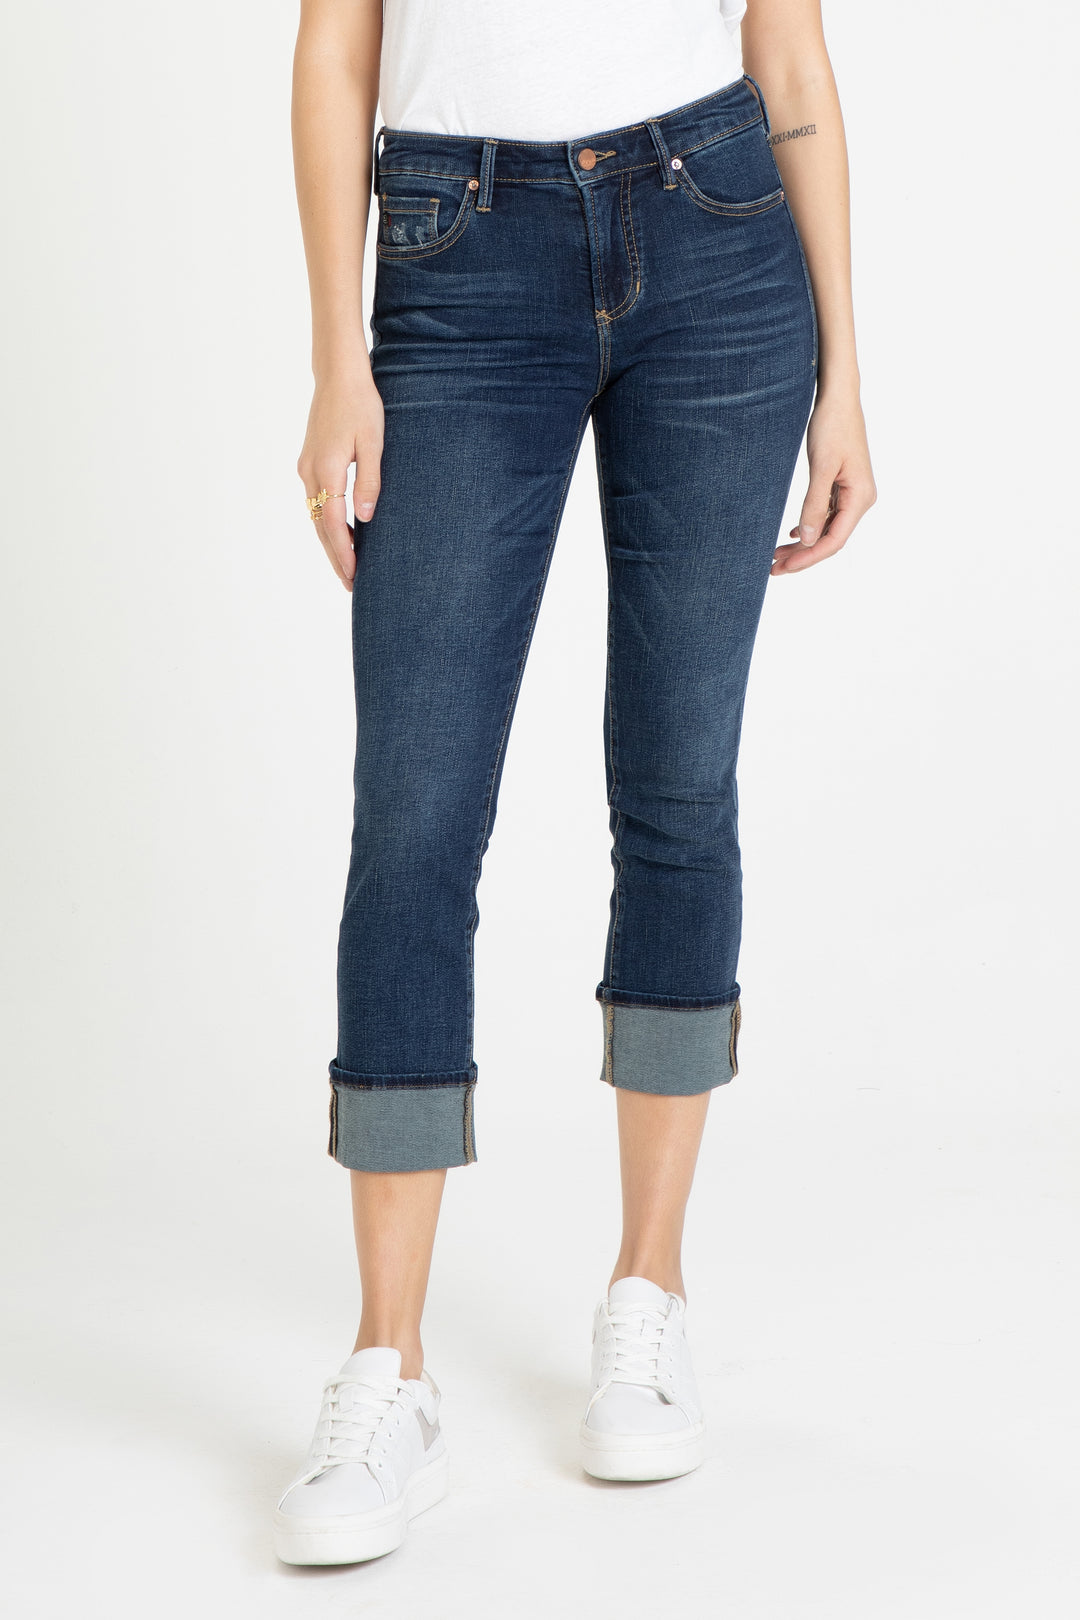 image of a female model wearing a 9 1/2" BLAIRE CUFFED JEANS IN DENVER JEANS